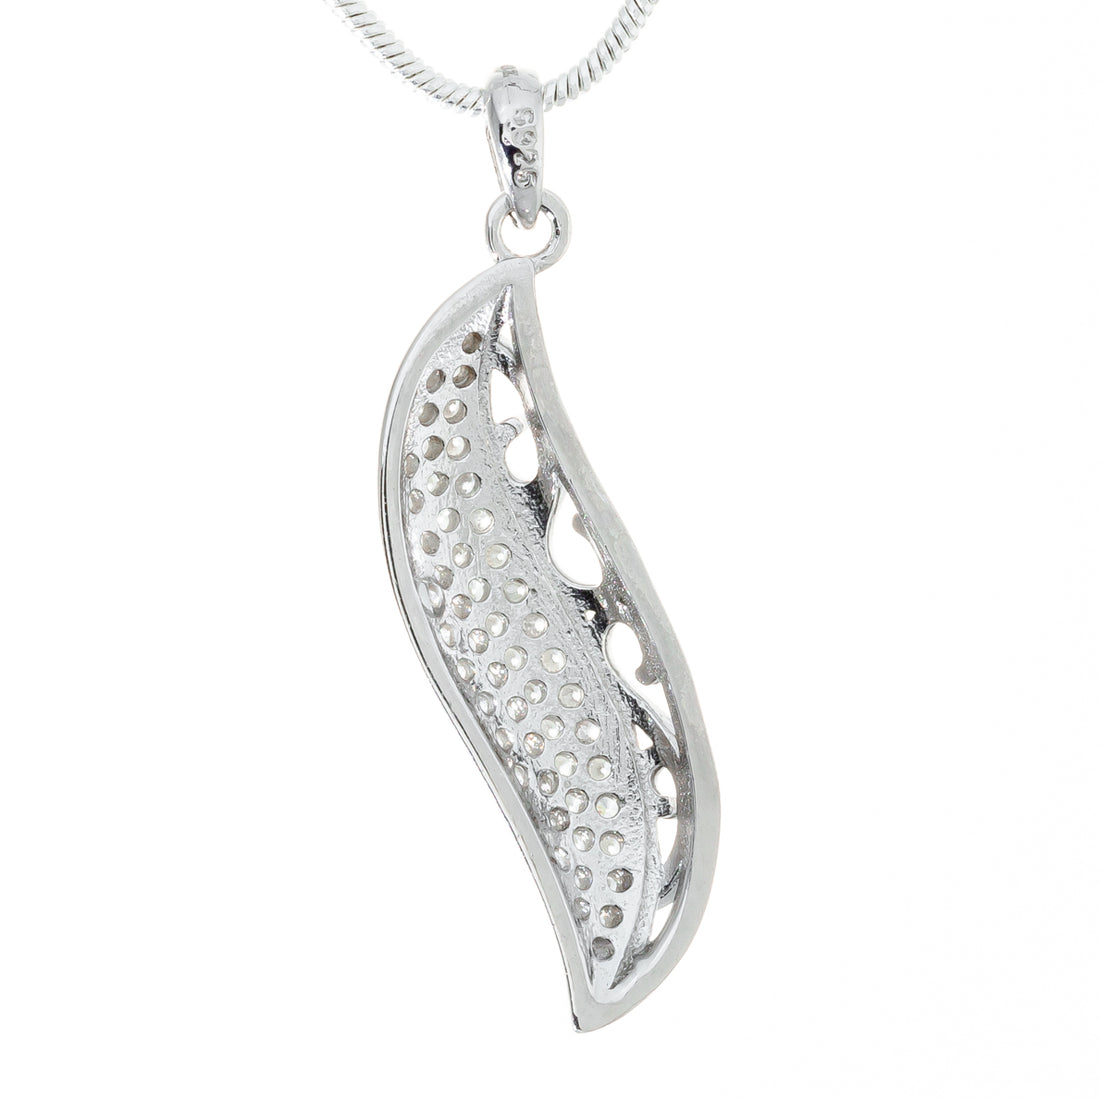 Leafy Antique Paved CZ Sterling Silver Pendant with Rhodium Coating and E-Coating Default Title